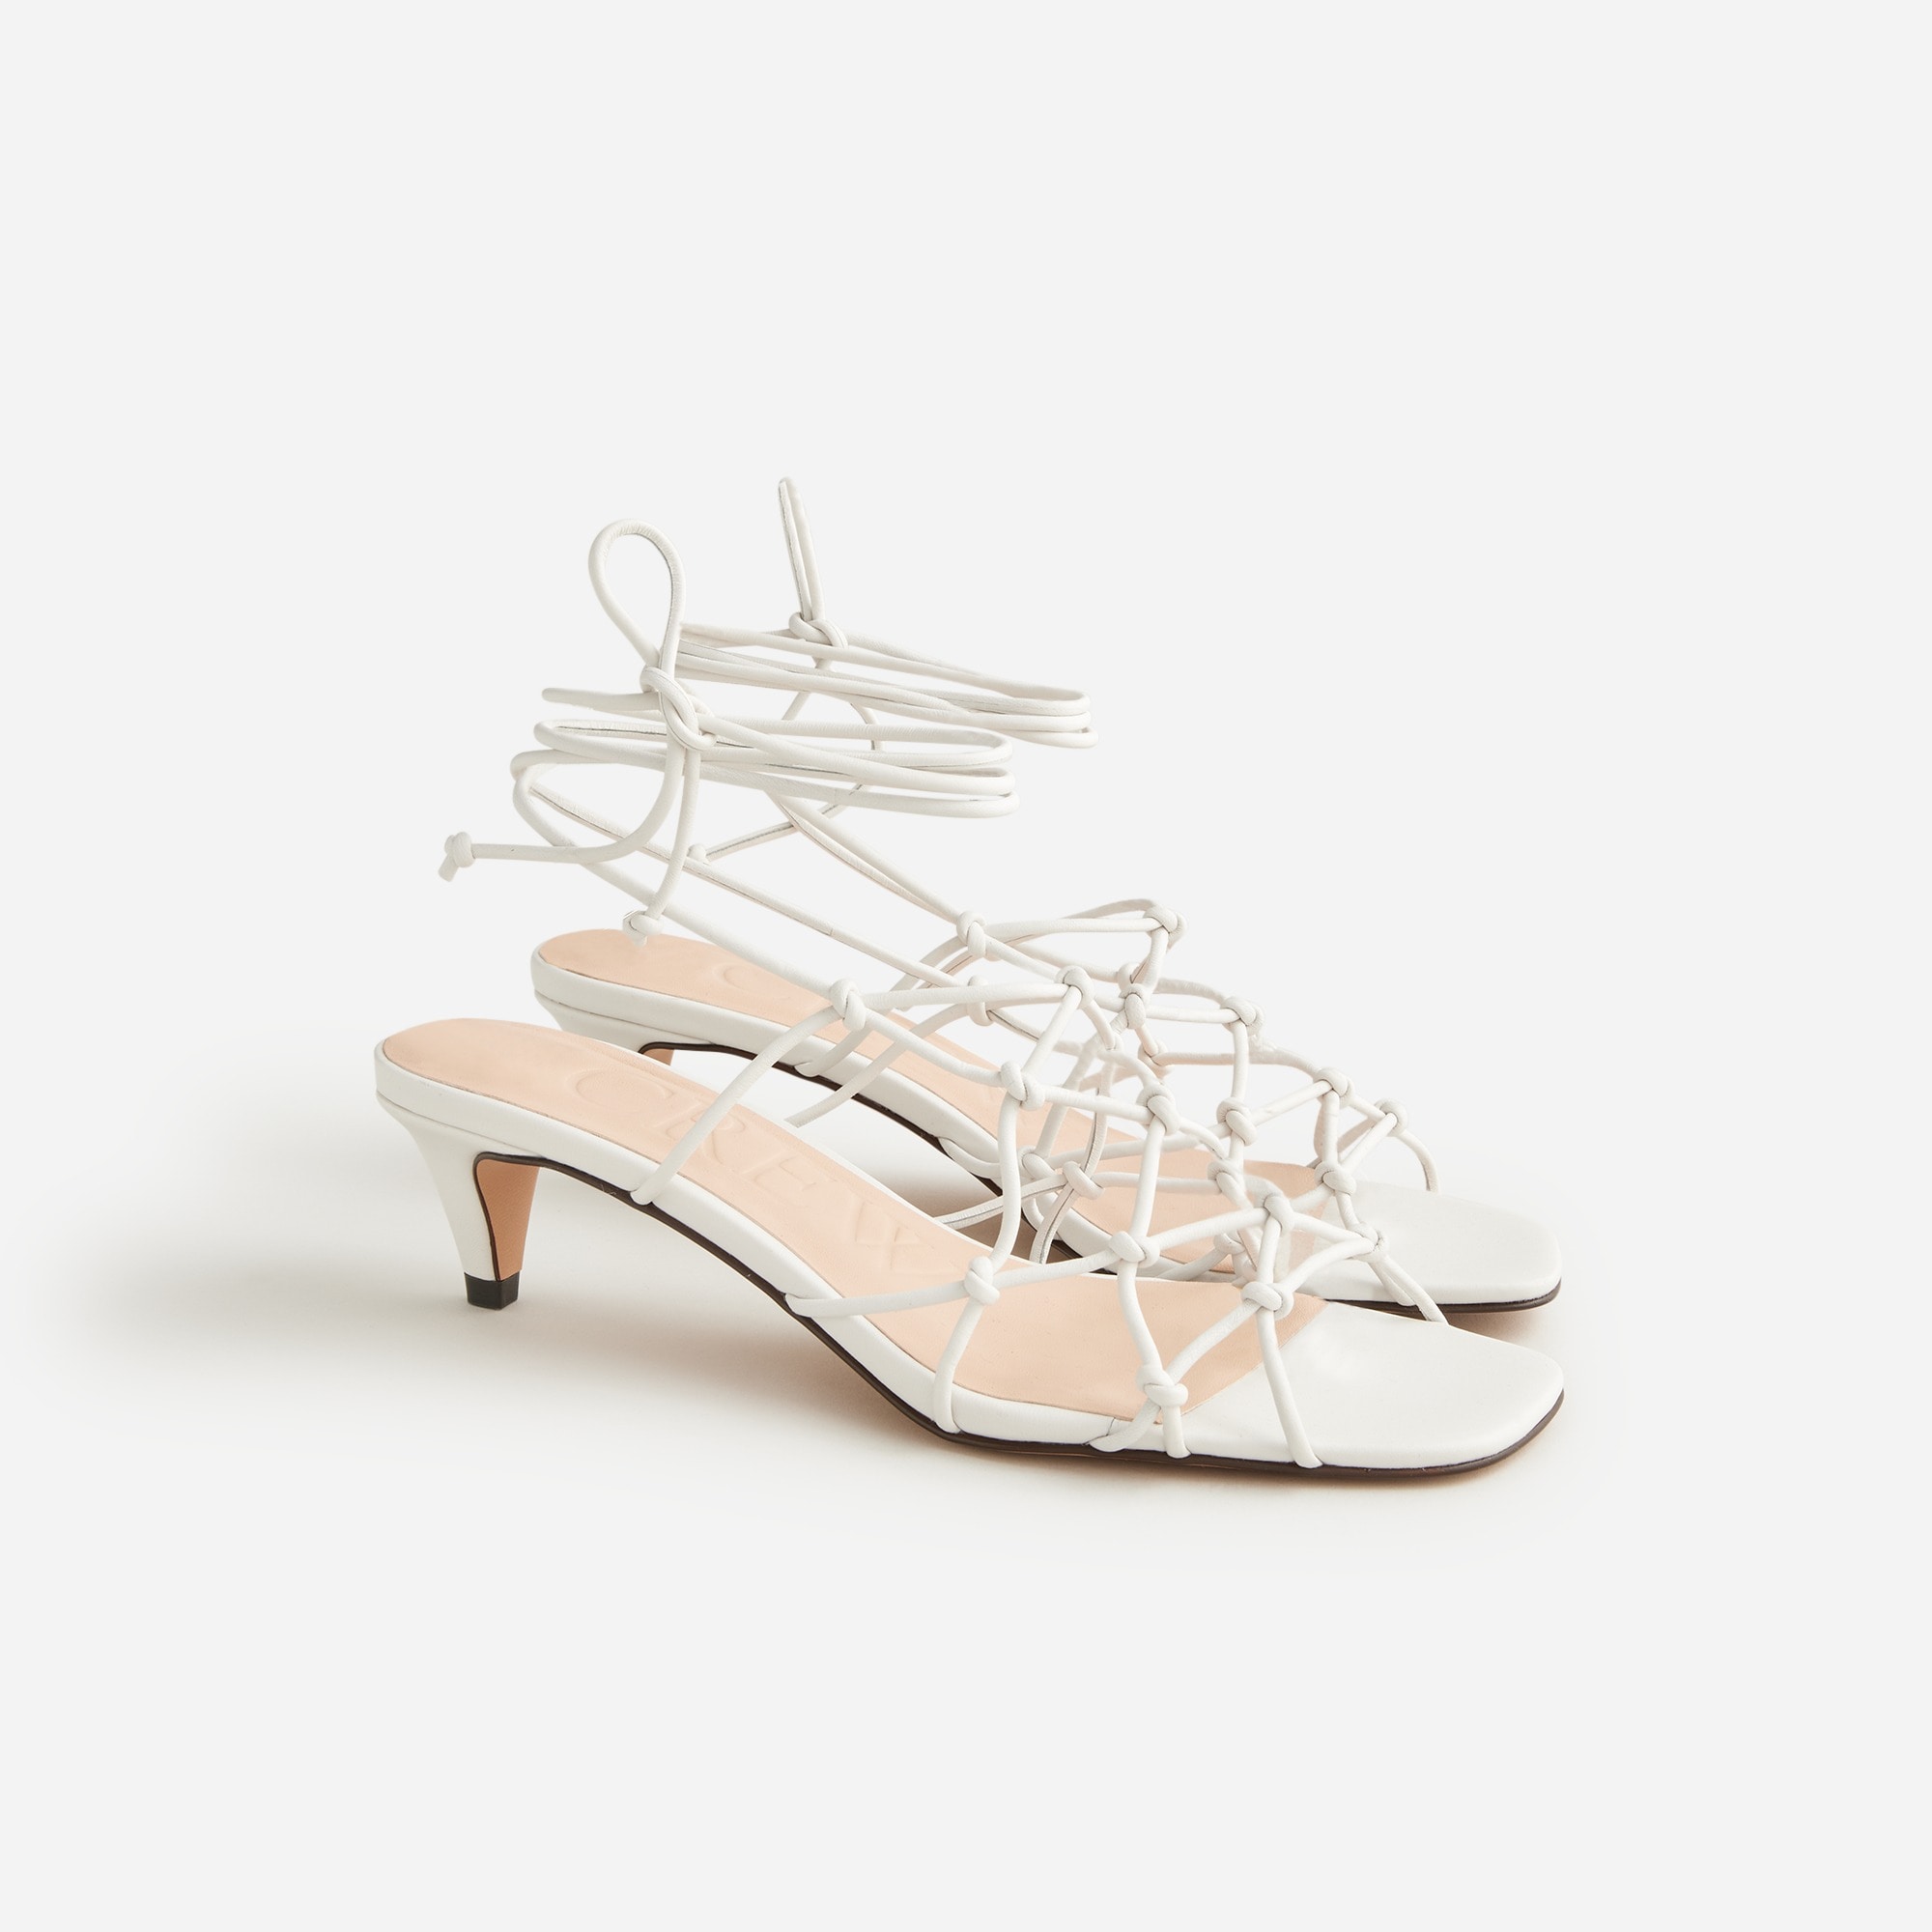  Zadie knotted lace-up kitten heels in leather